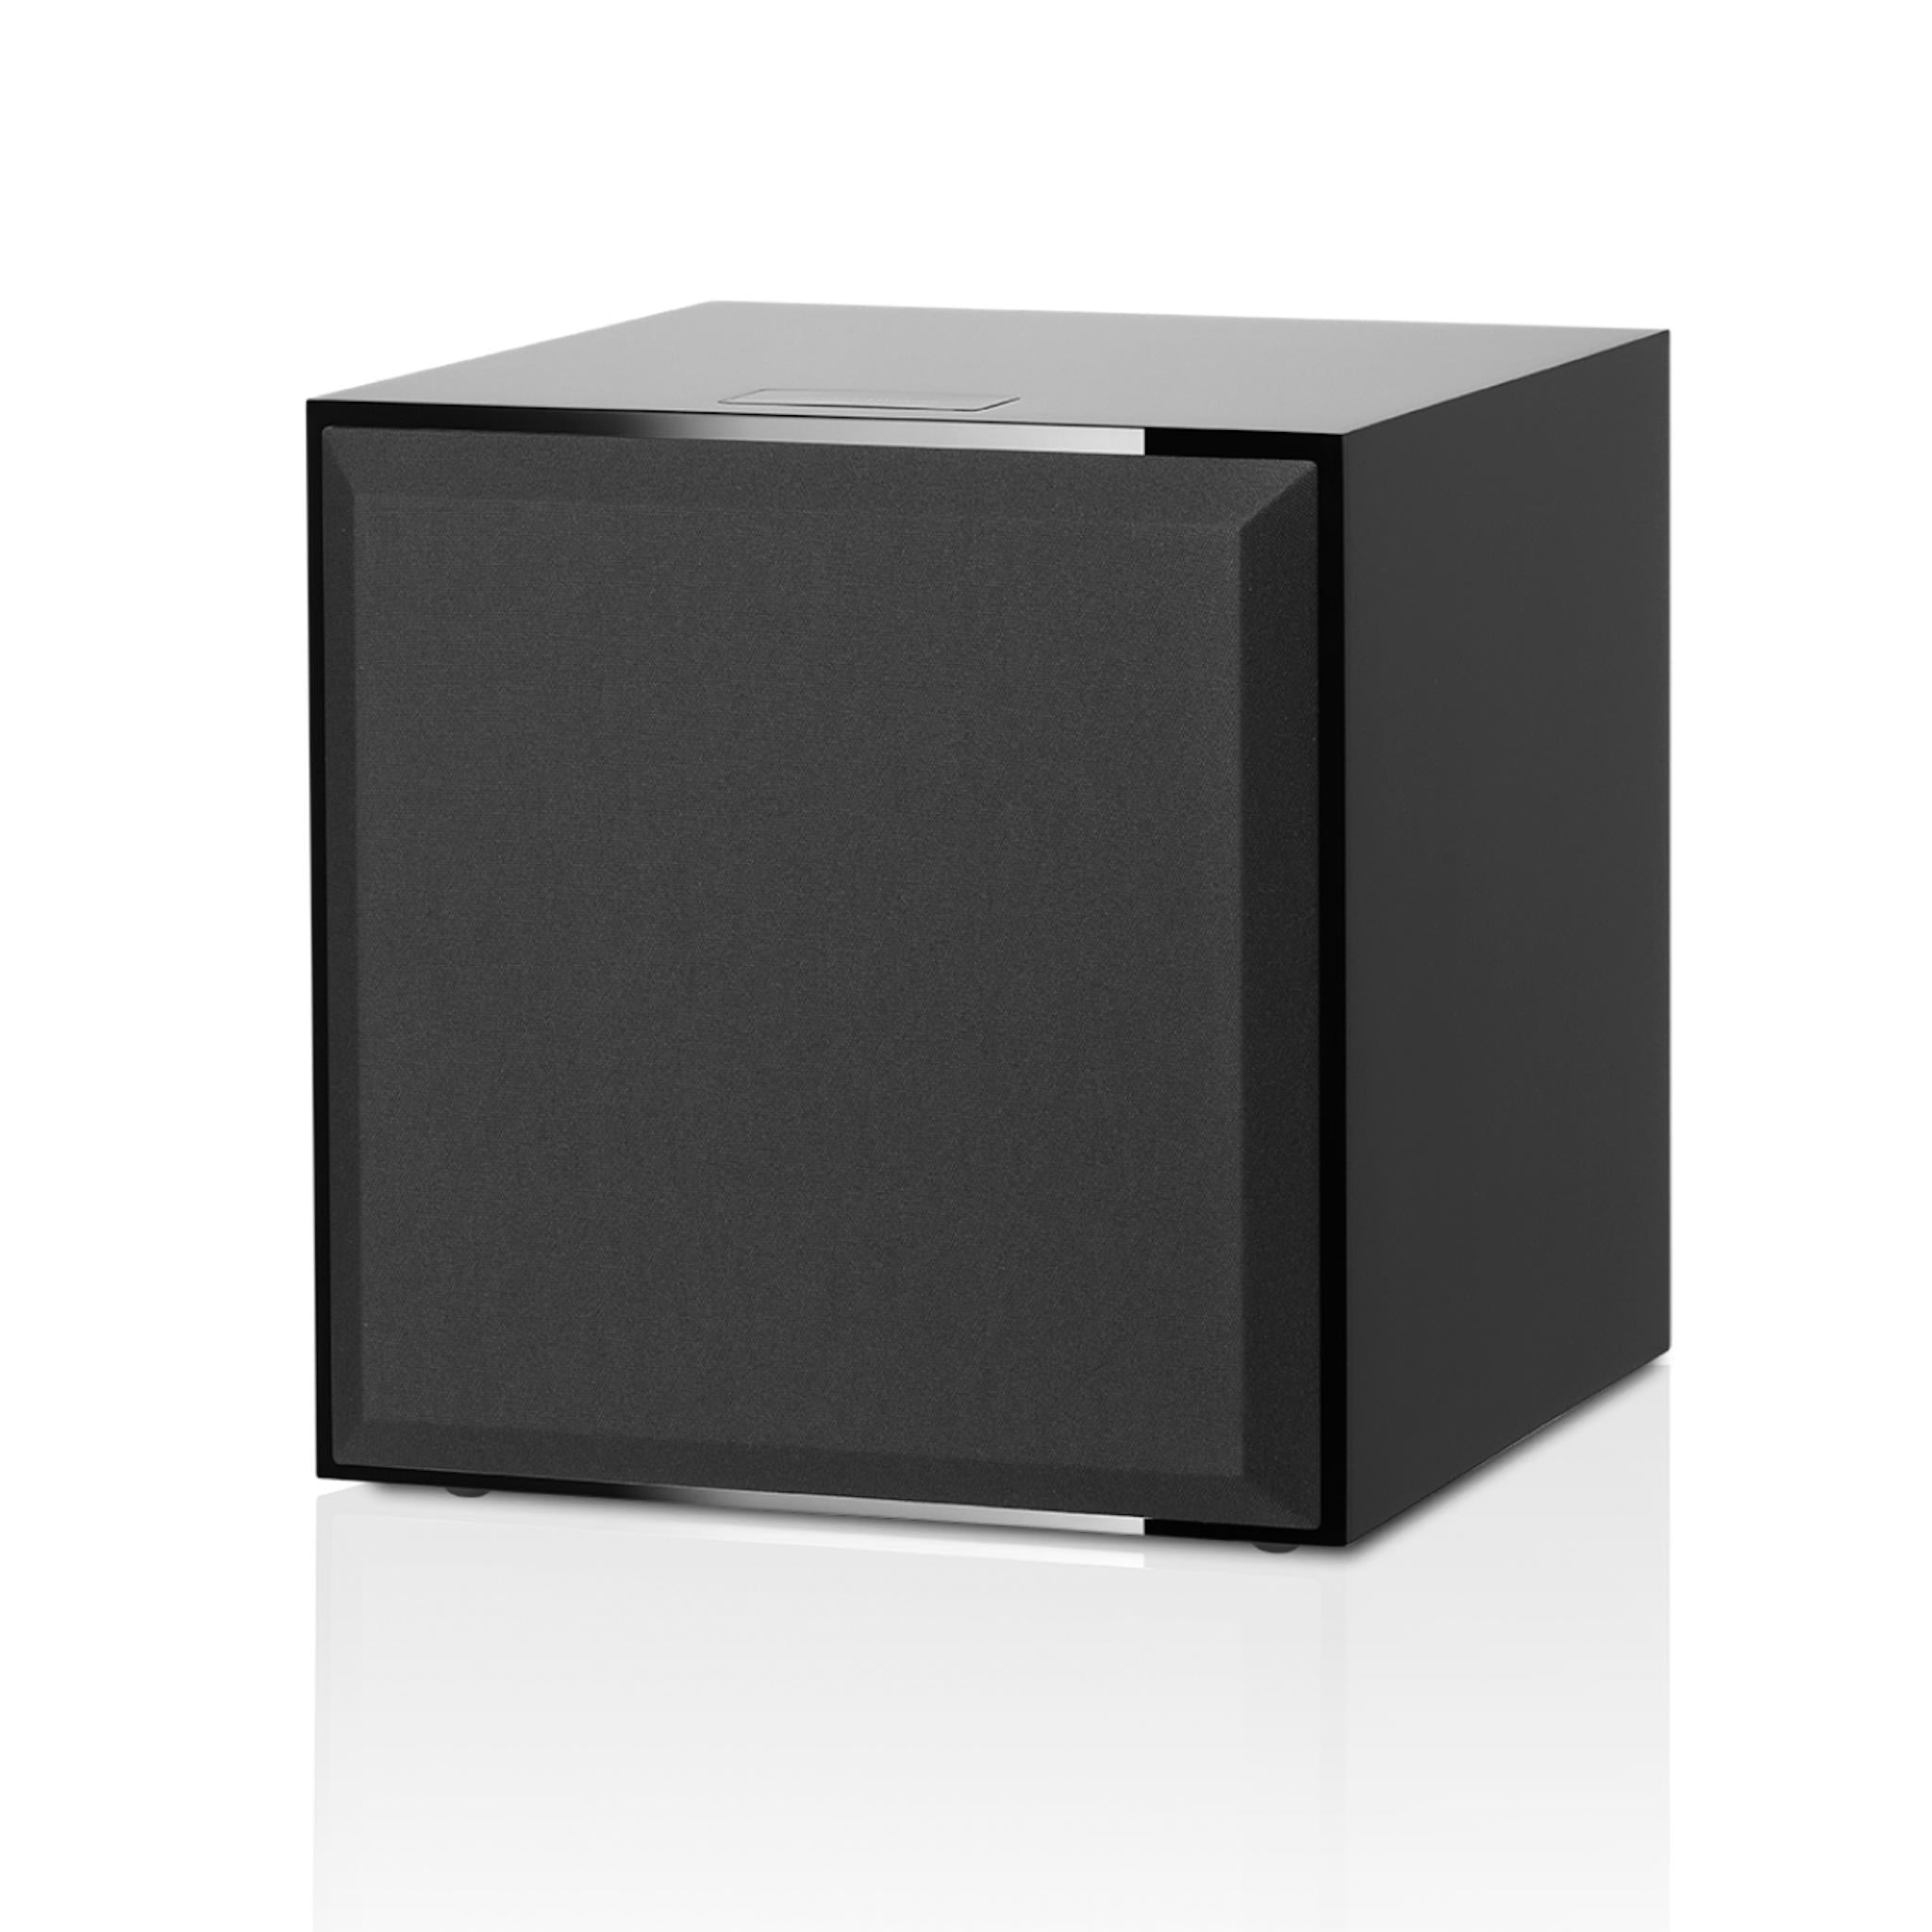 Bowers & Wilkins DB4S - Active Subwoofer - AVStore